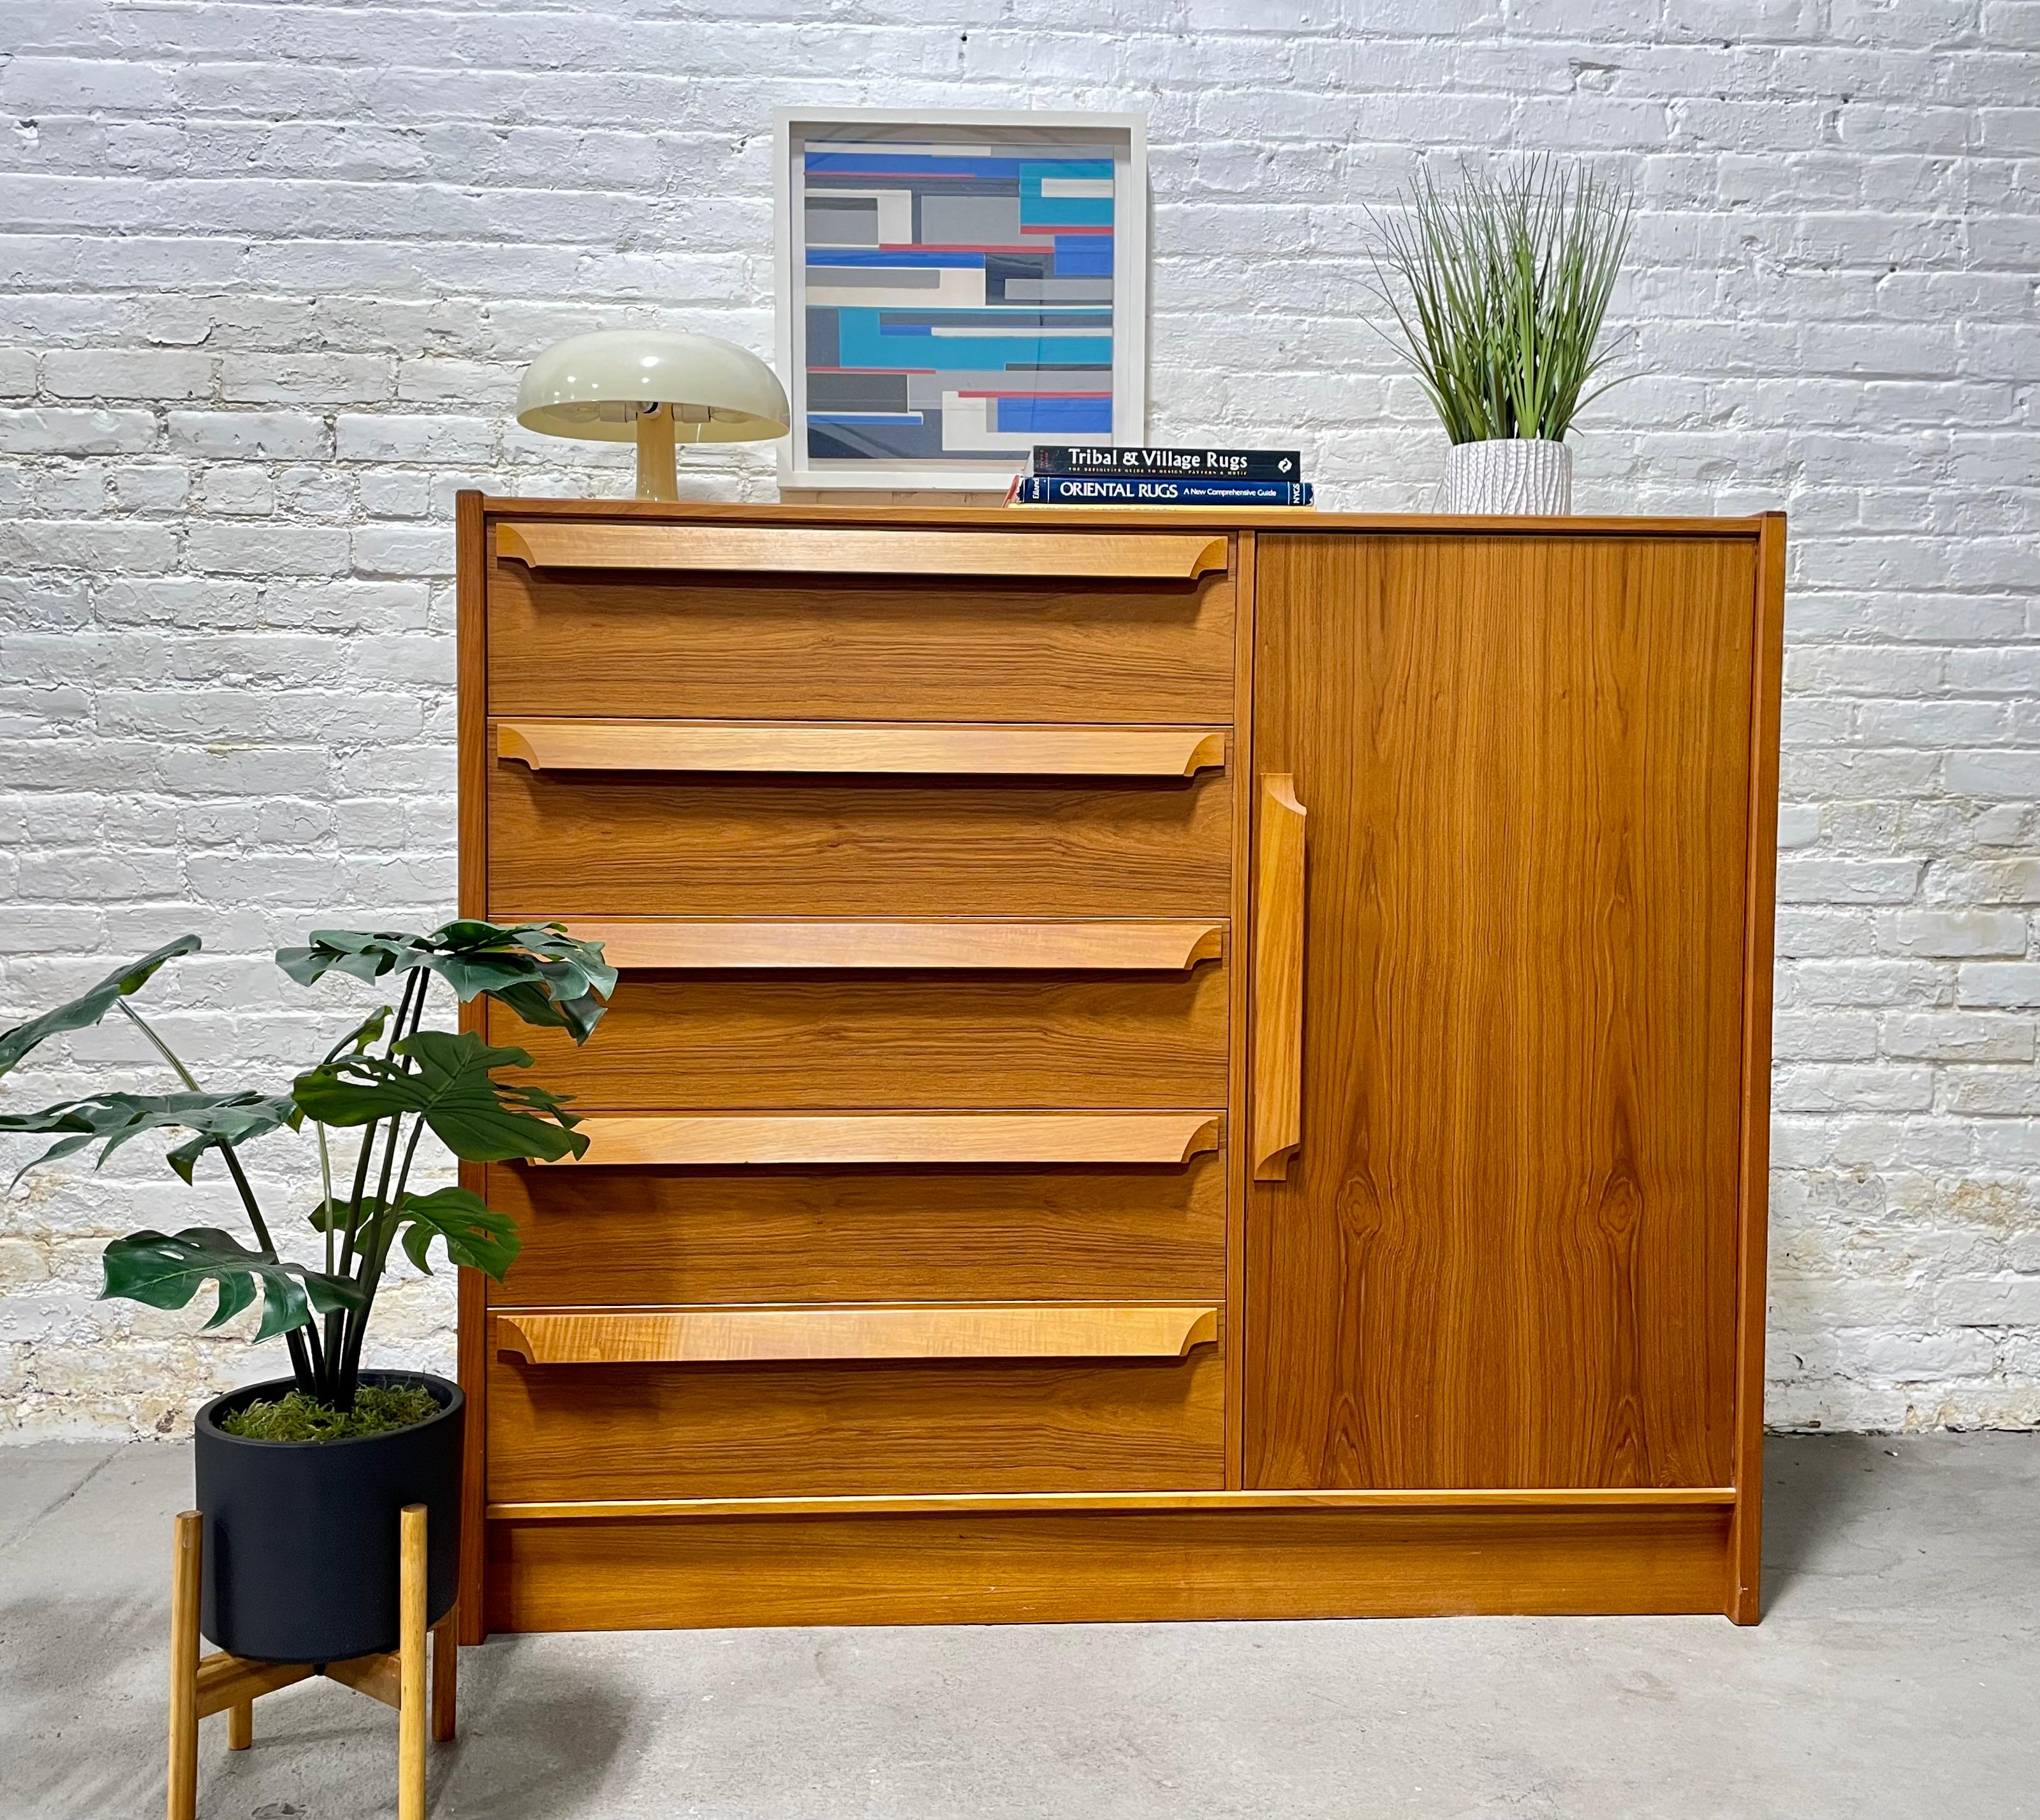 Sculpted Mid-Century Modern Danish teak gentlemen's chest by Skovby Mobelfabrik. This gorgeous armoire features loads of storage space in a thoughtful combination of drawers and shelving space. Constructed in teak with lovely wood grains and solid